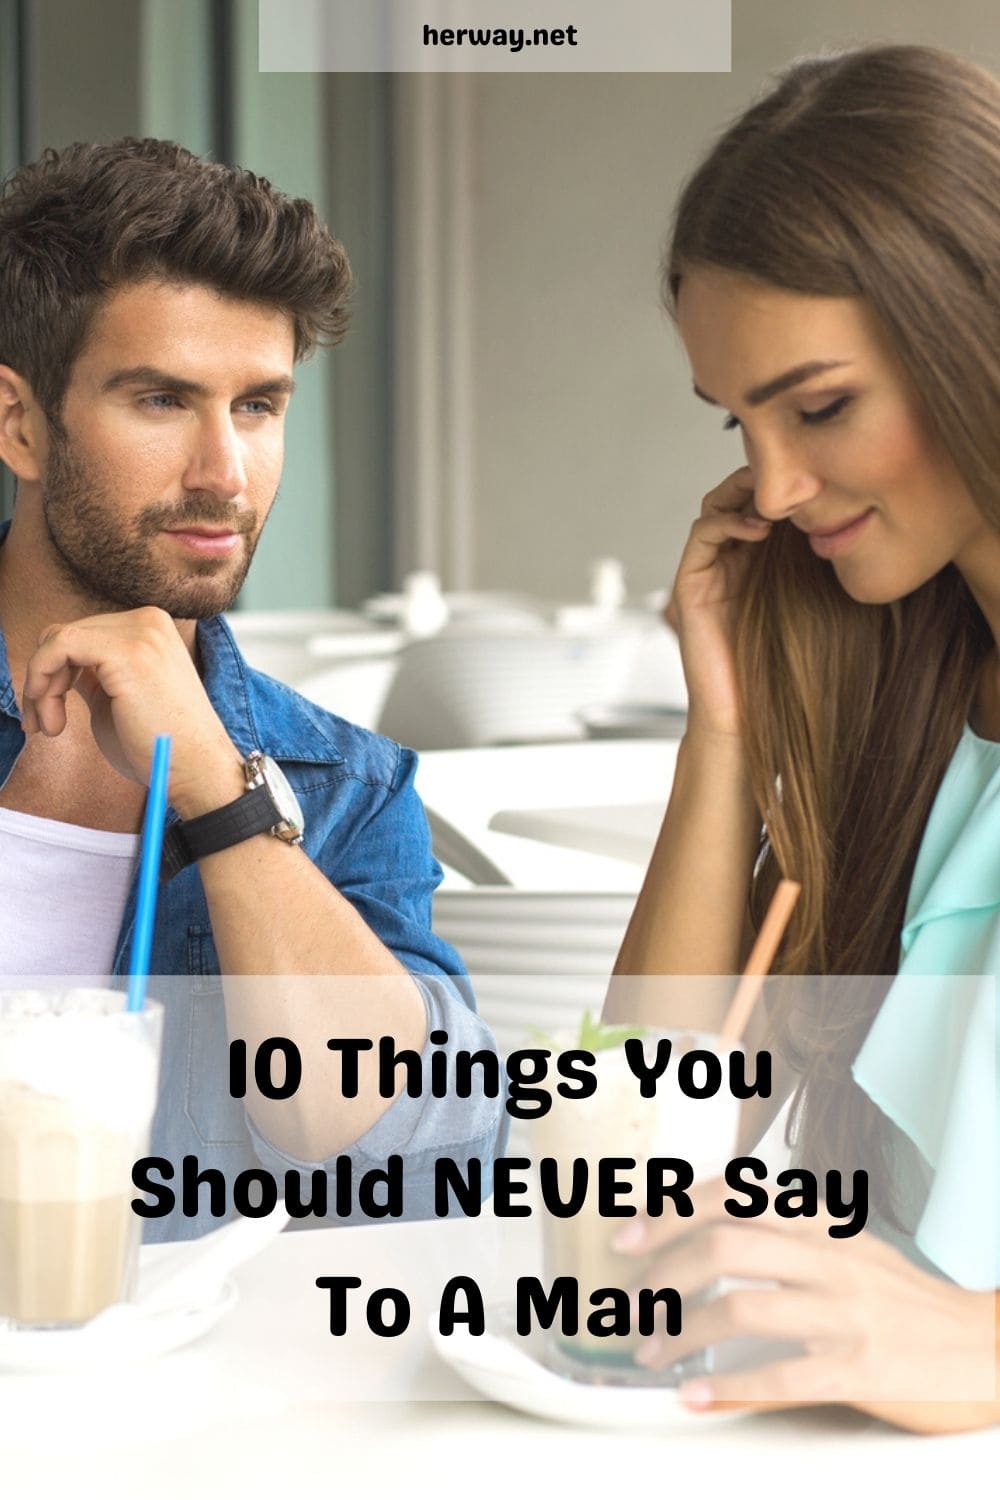 10 Things You Should NEVER Say To A Man